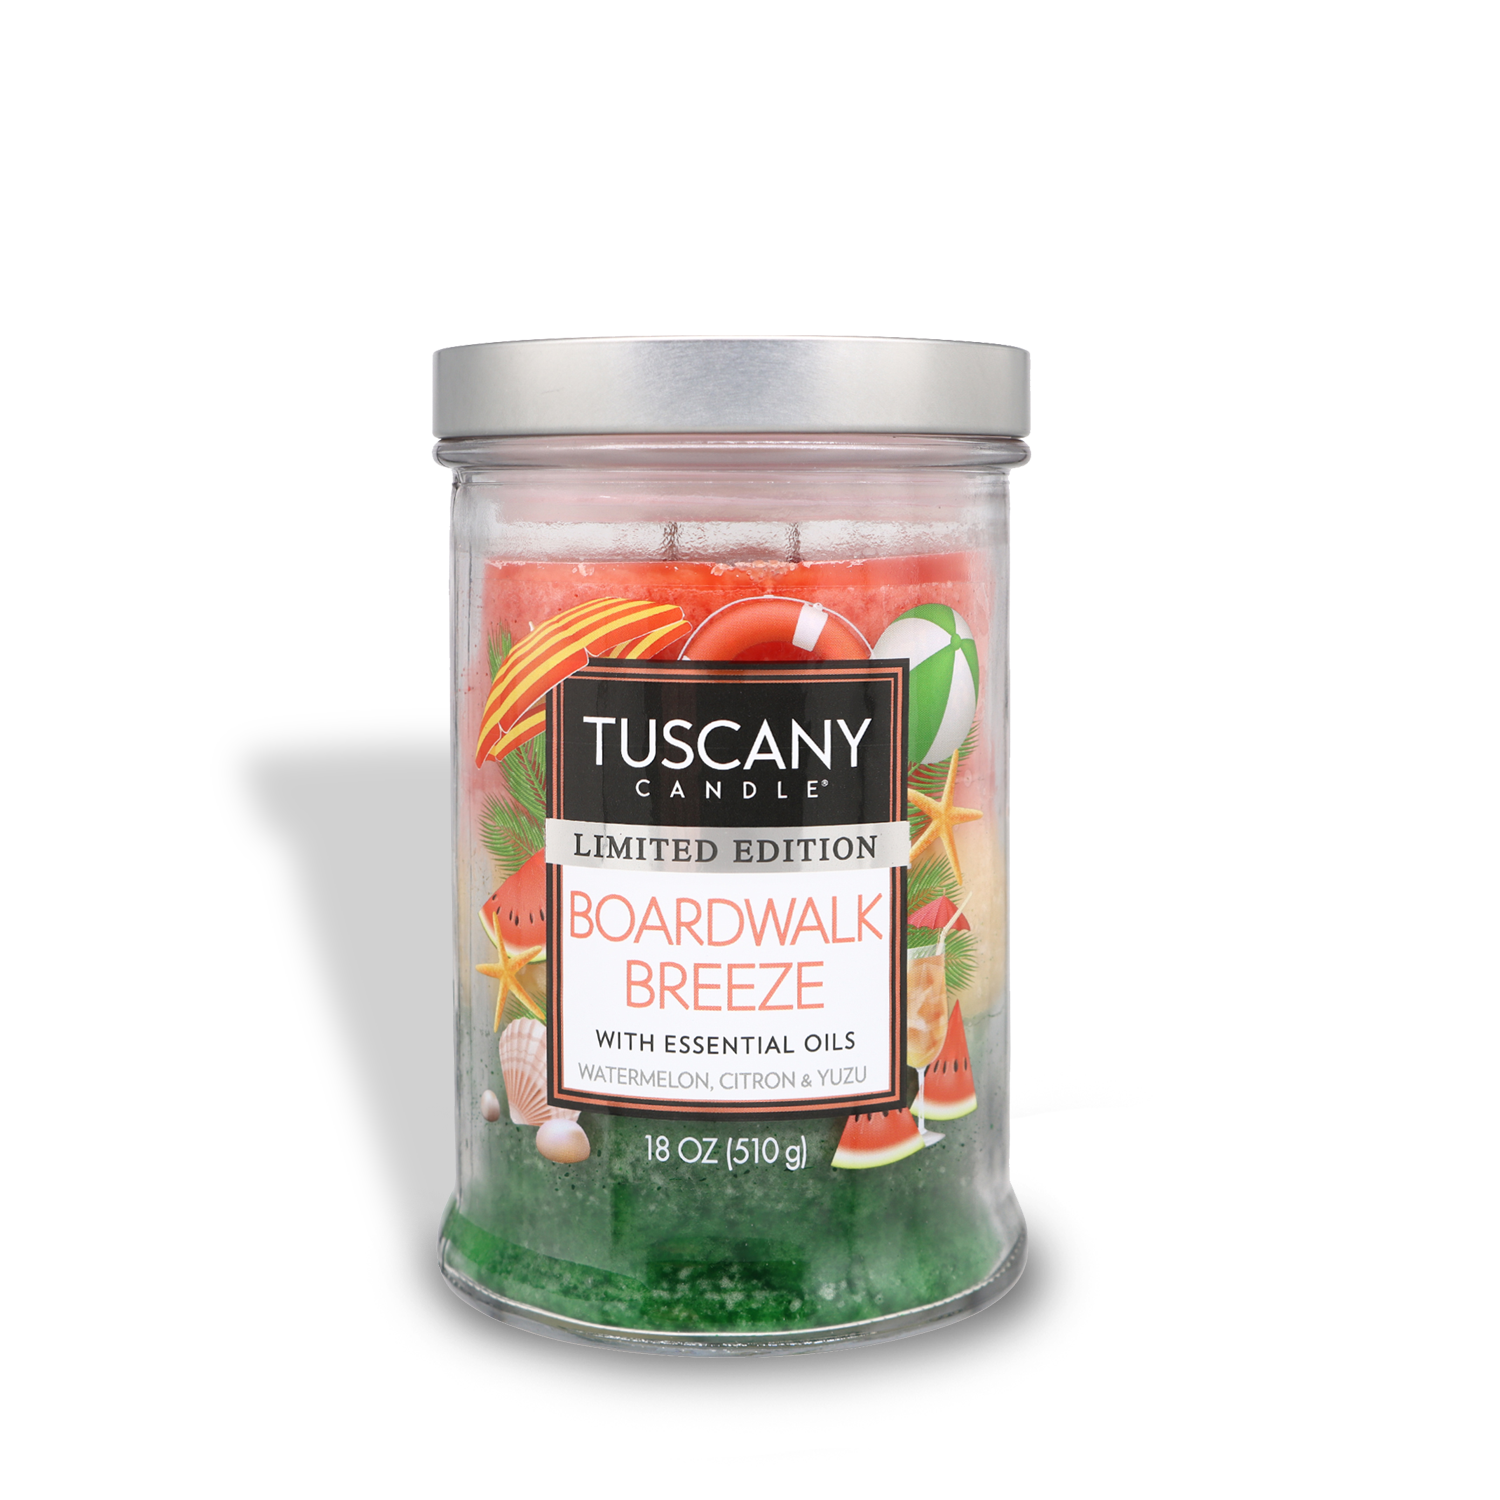 A Tuscany Candle® SEASONAL Boardwalk Breeze Long-Lasting Scented Jar Candle (18 oz) with green and red colors, perfect for summer evenings.